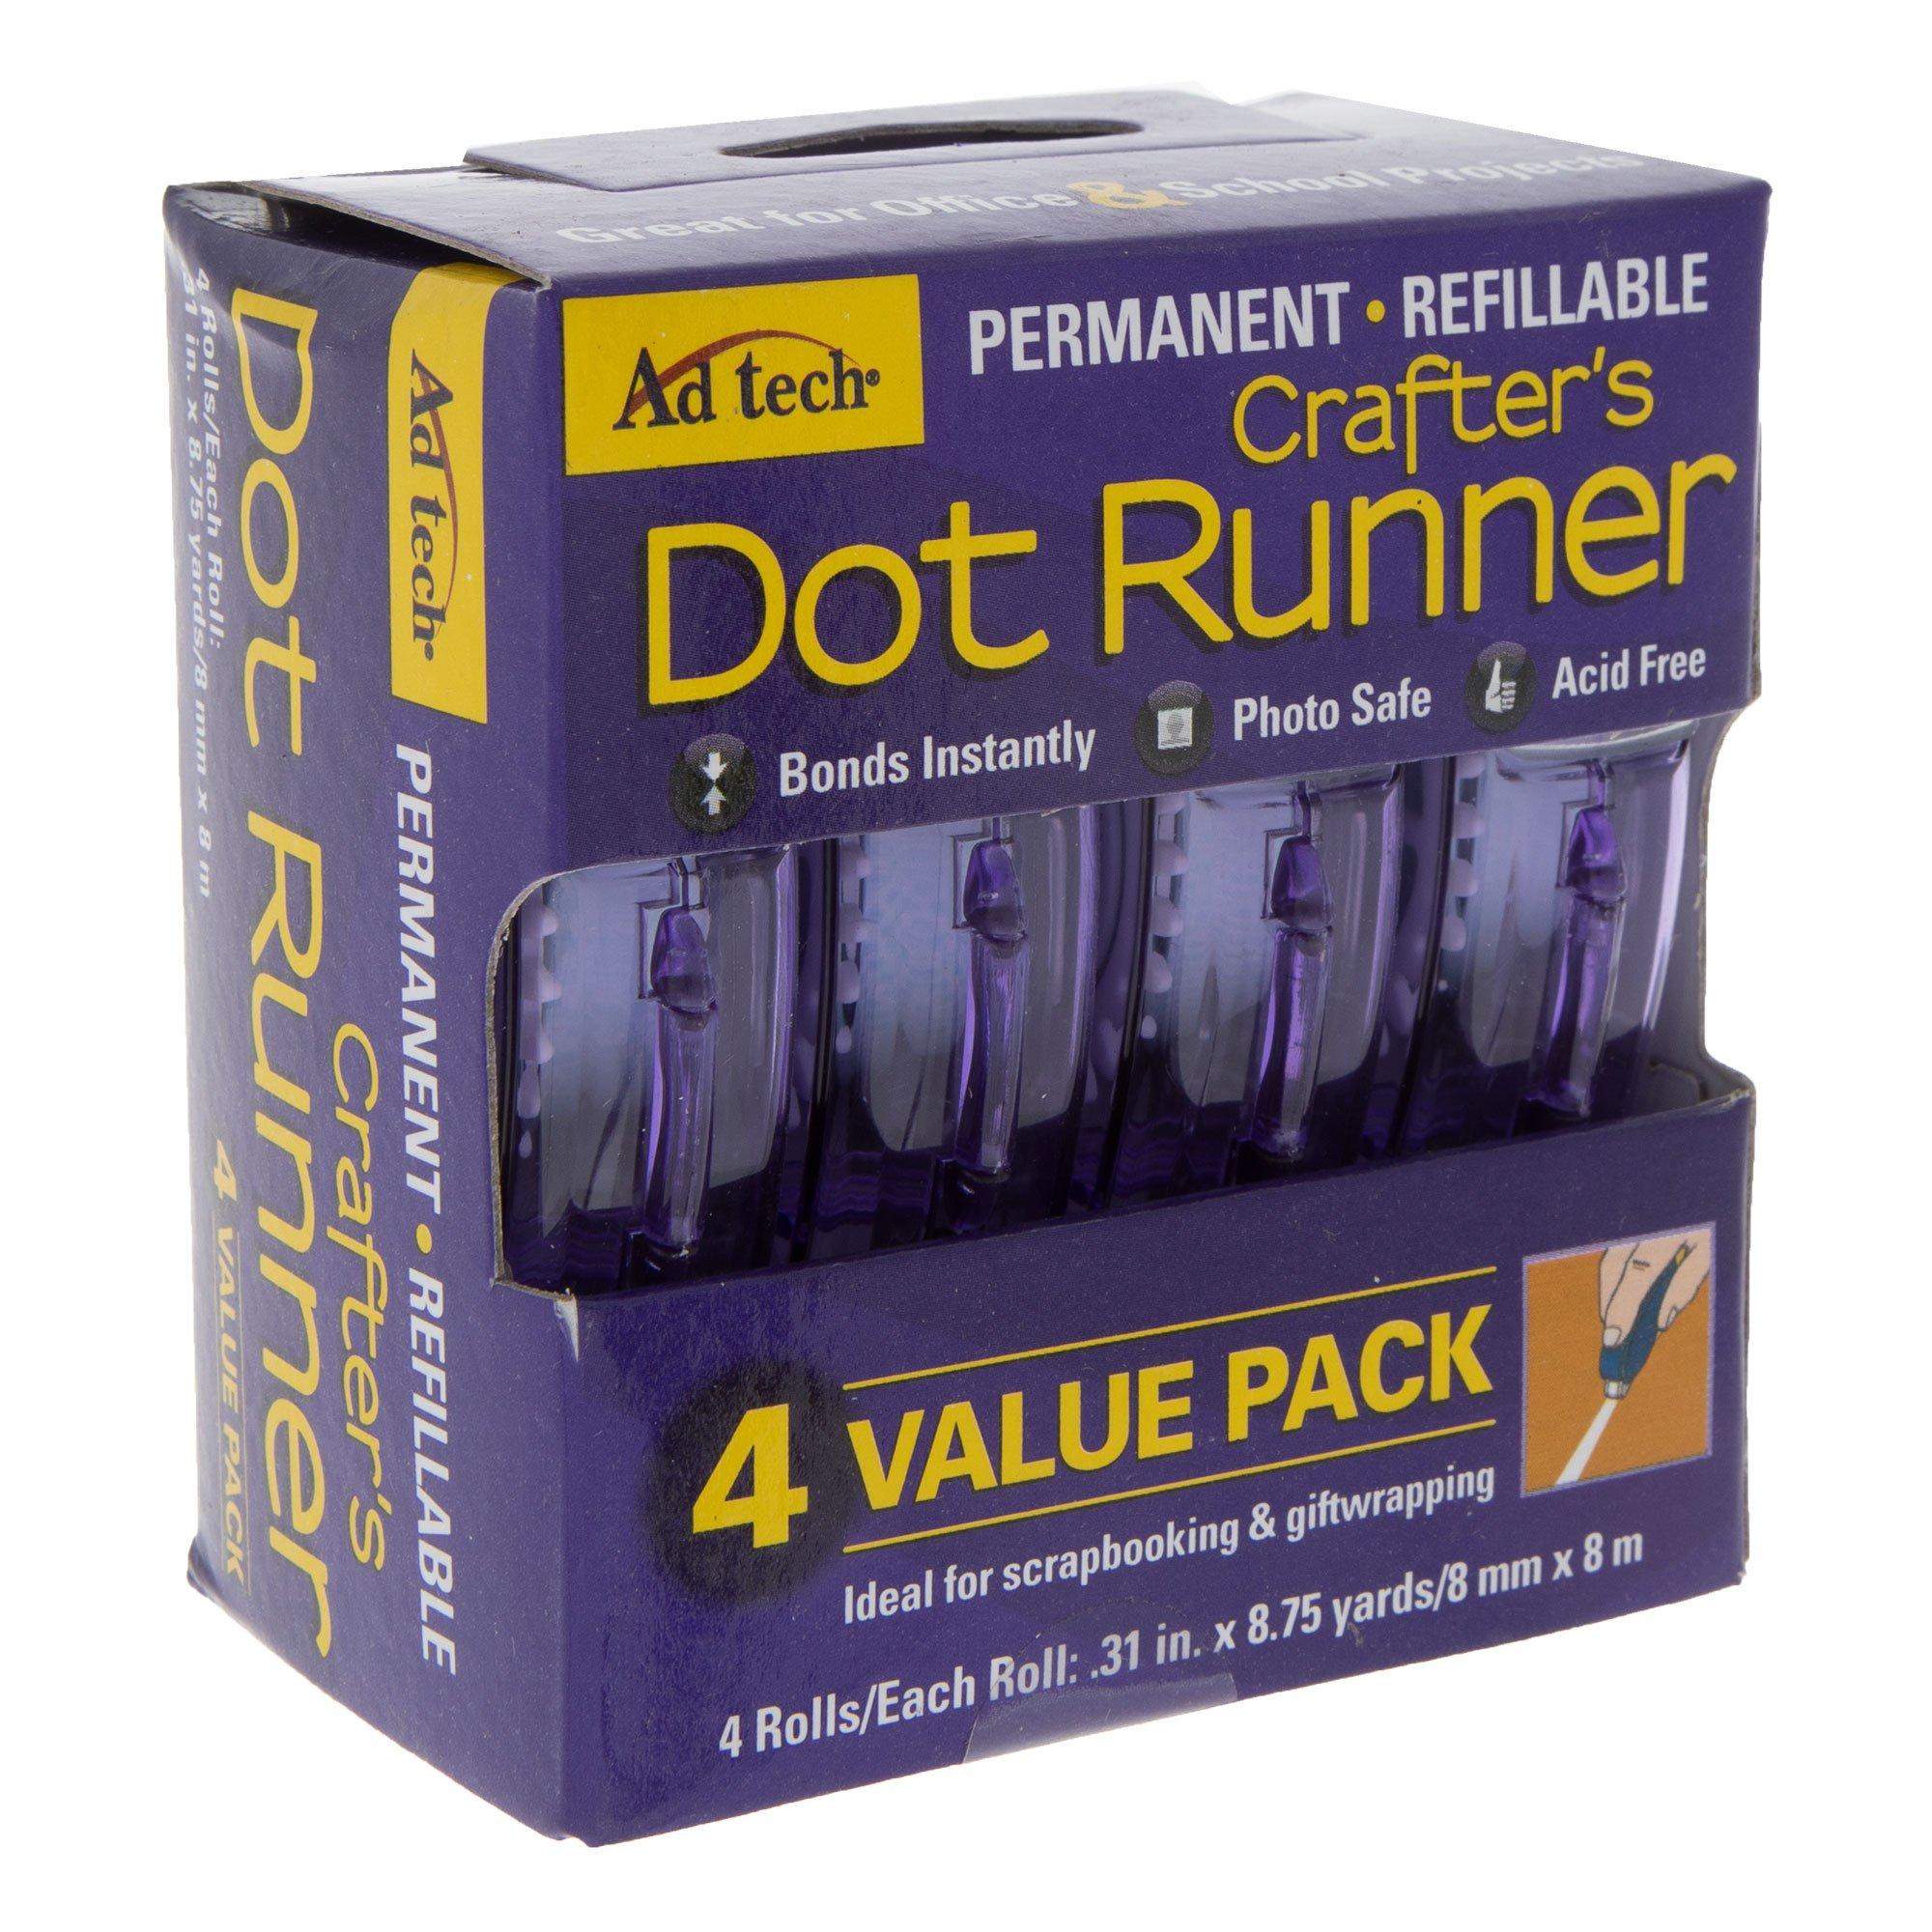 Permanent Crafter's Tape Refill Value Pack